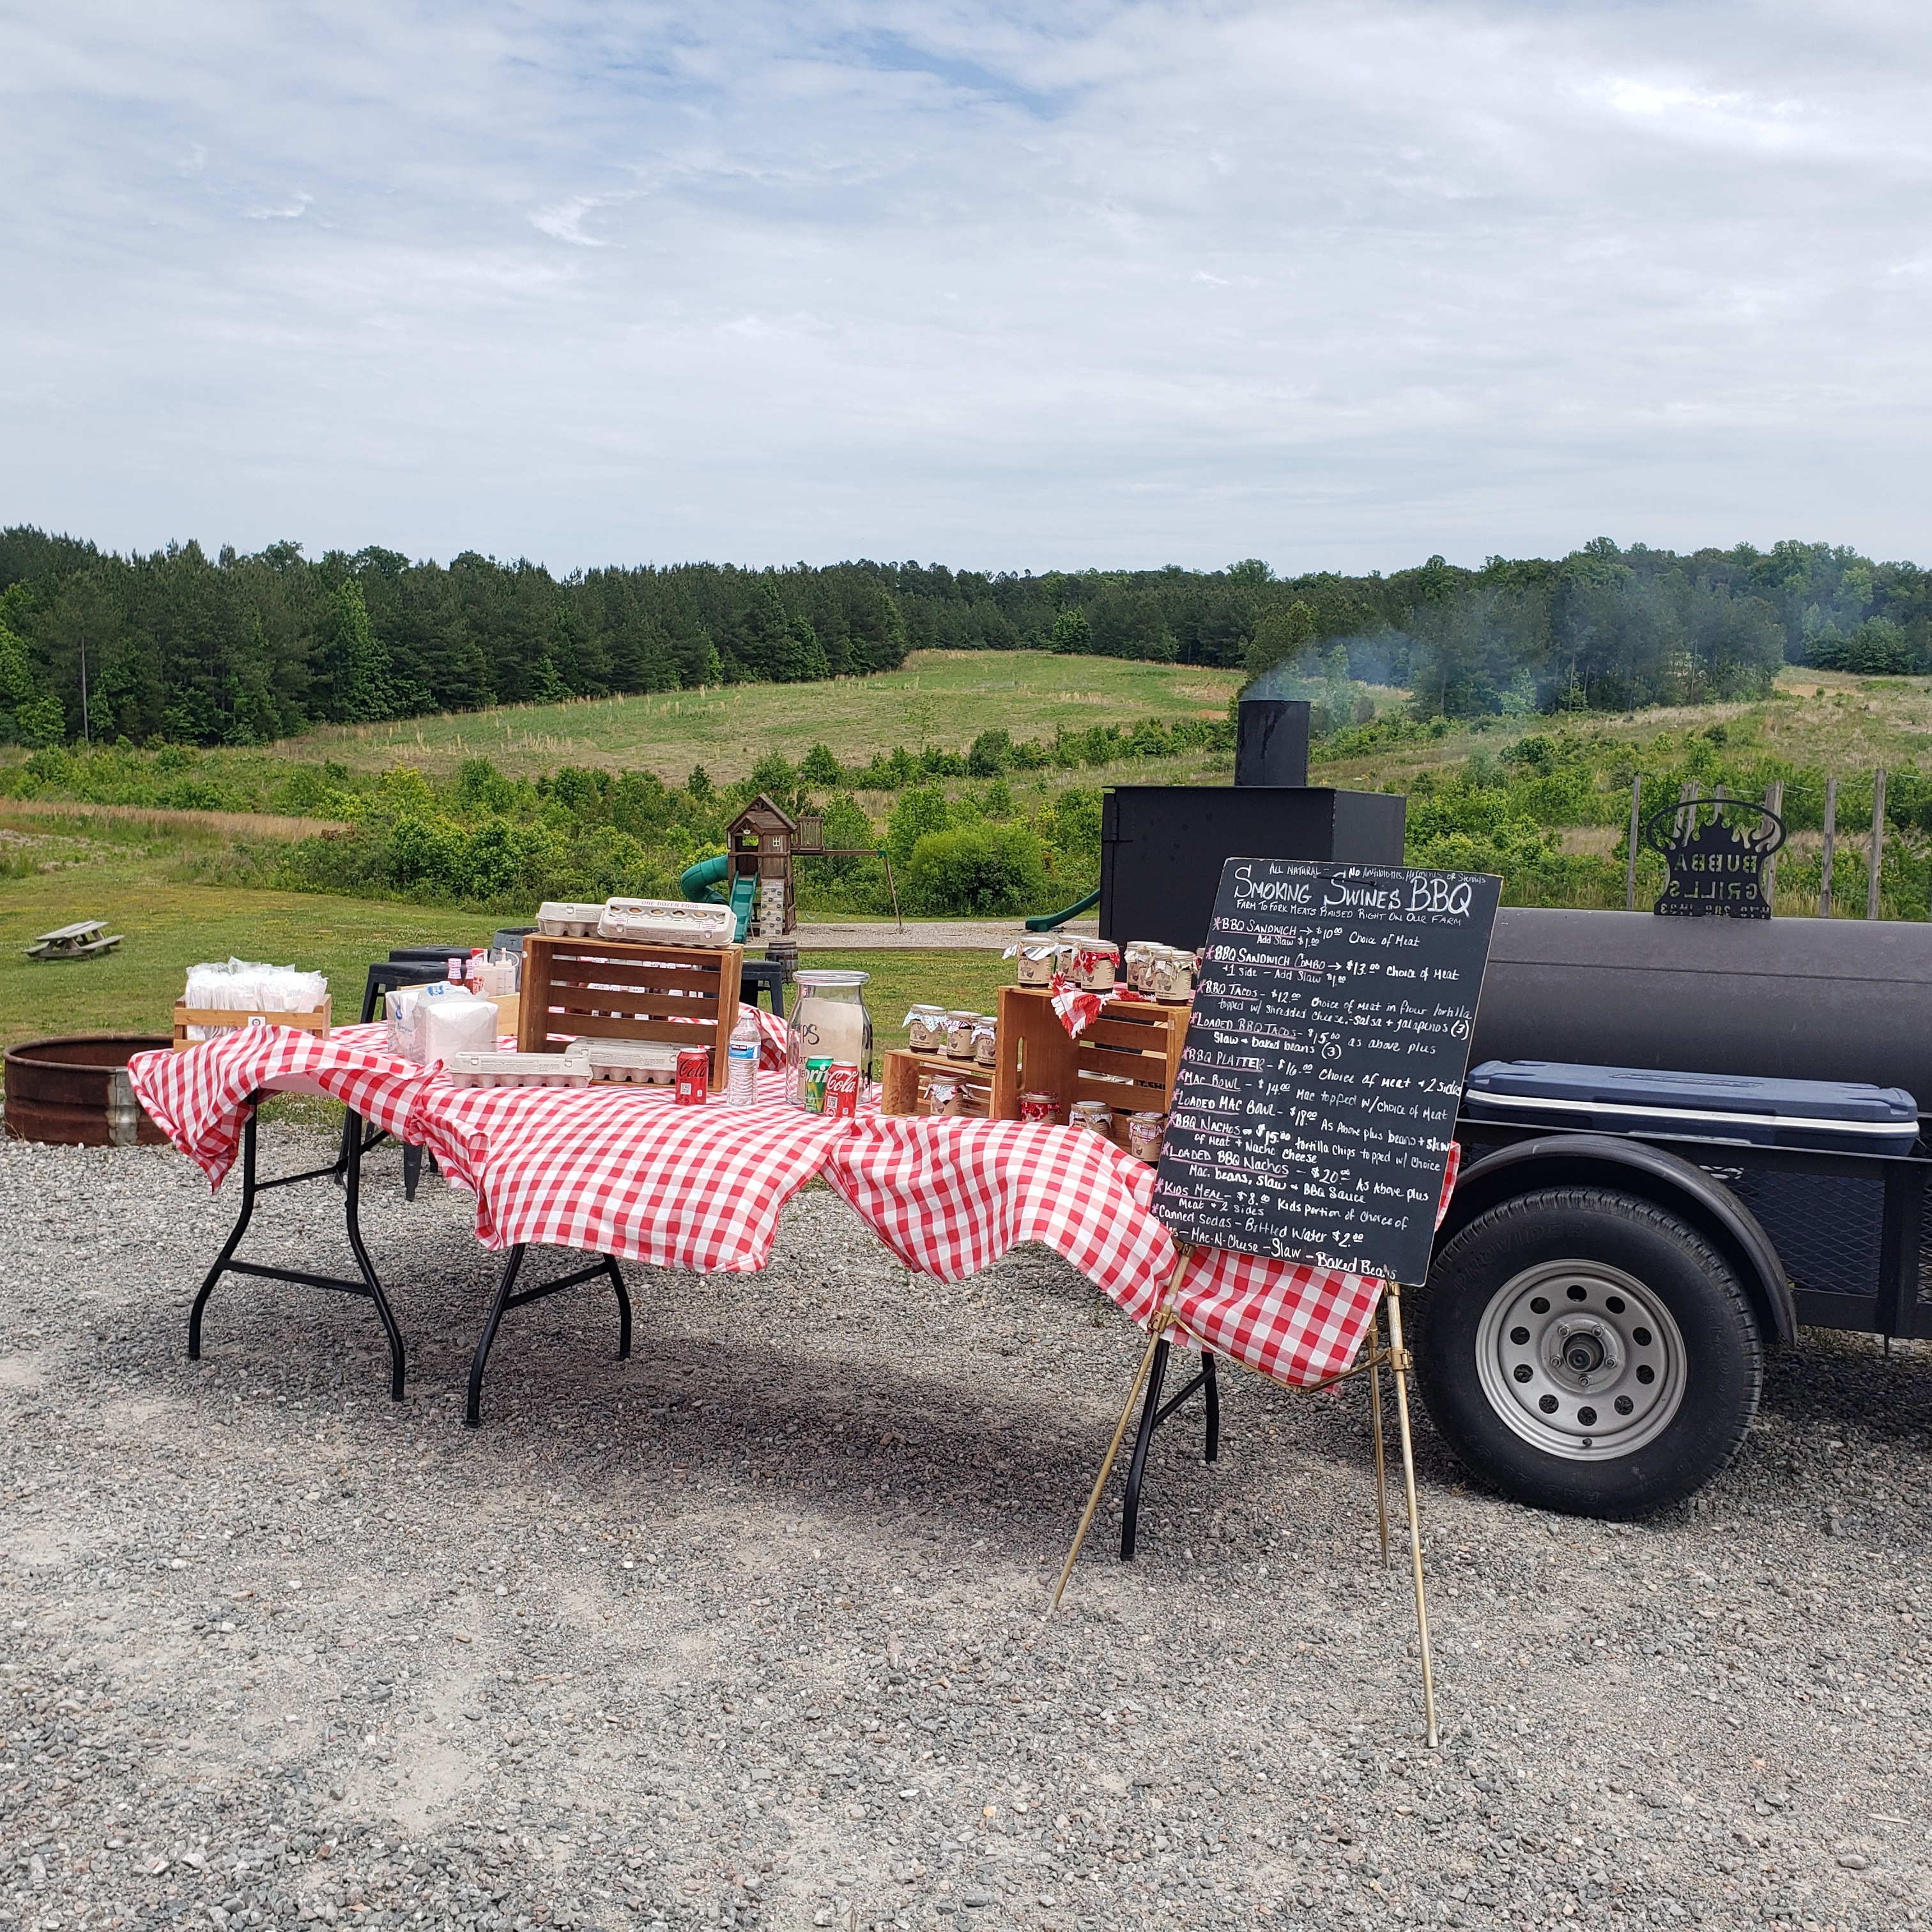 Southern Roots Farm Smoking Swines BBQ food truck profile image